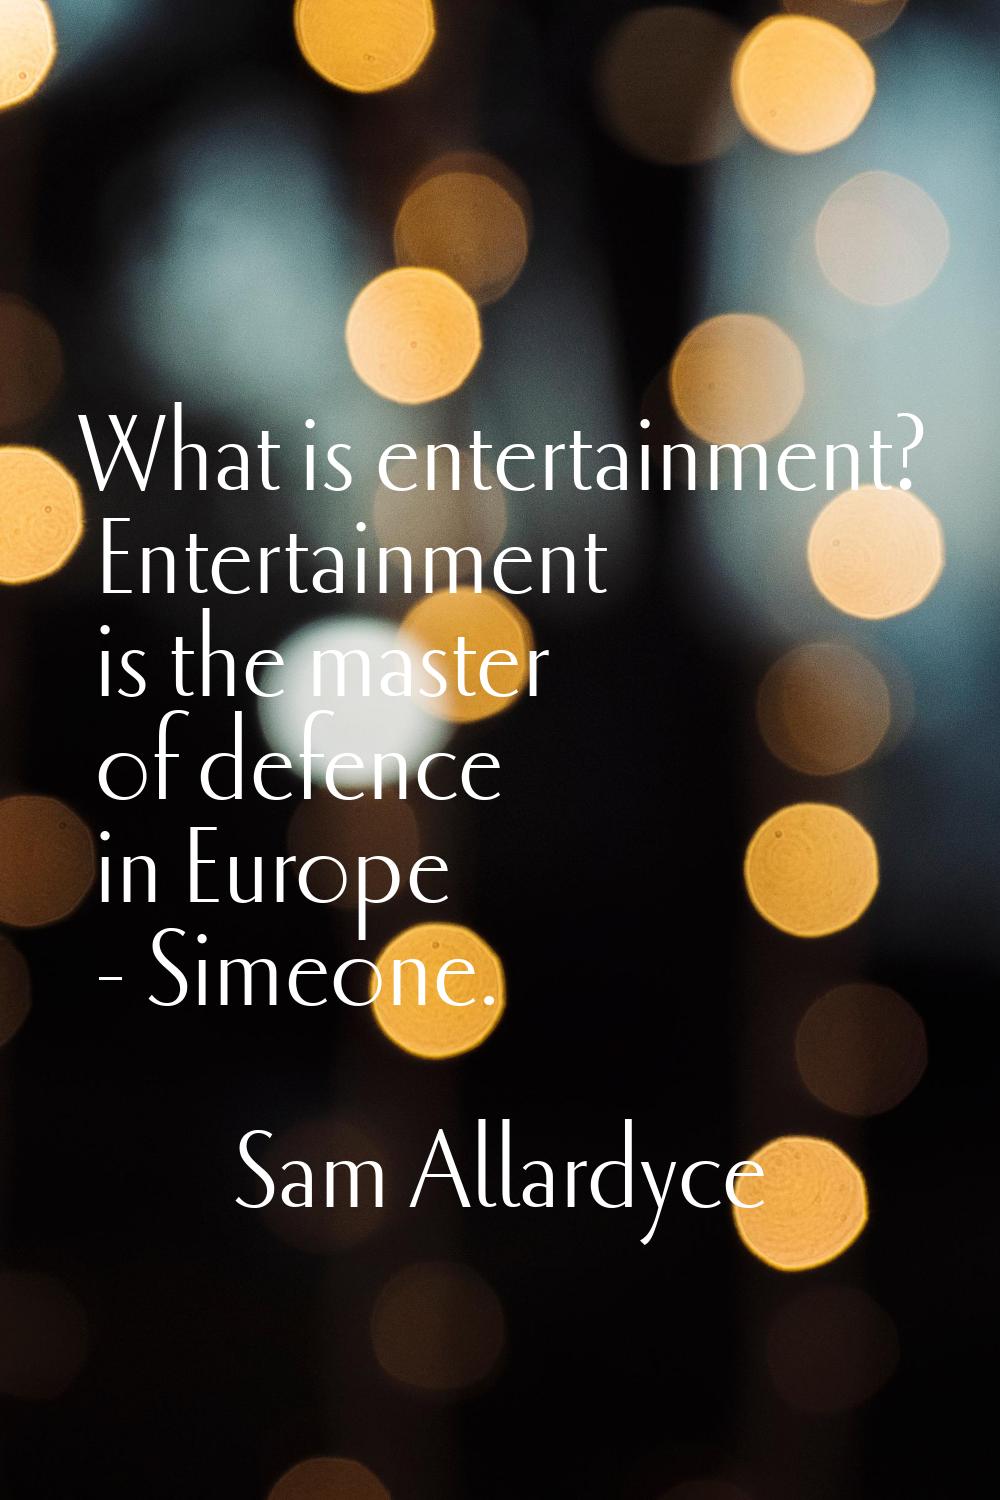 What is entertainment? Entertainment is the master of defence in Europe - Simeone.